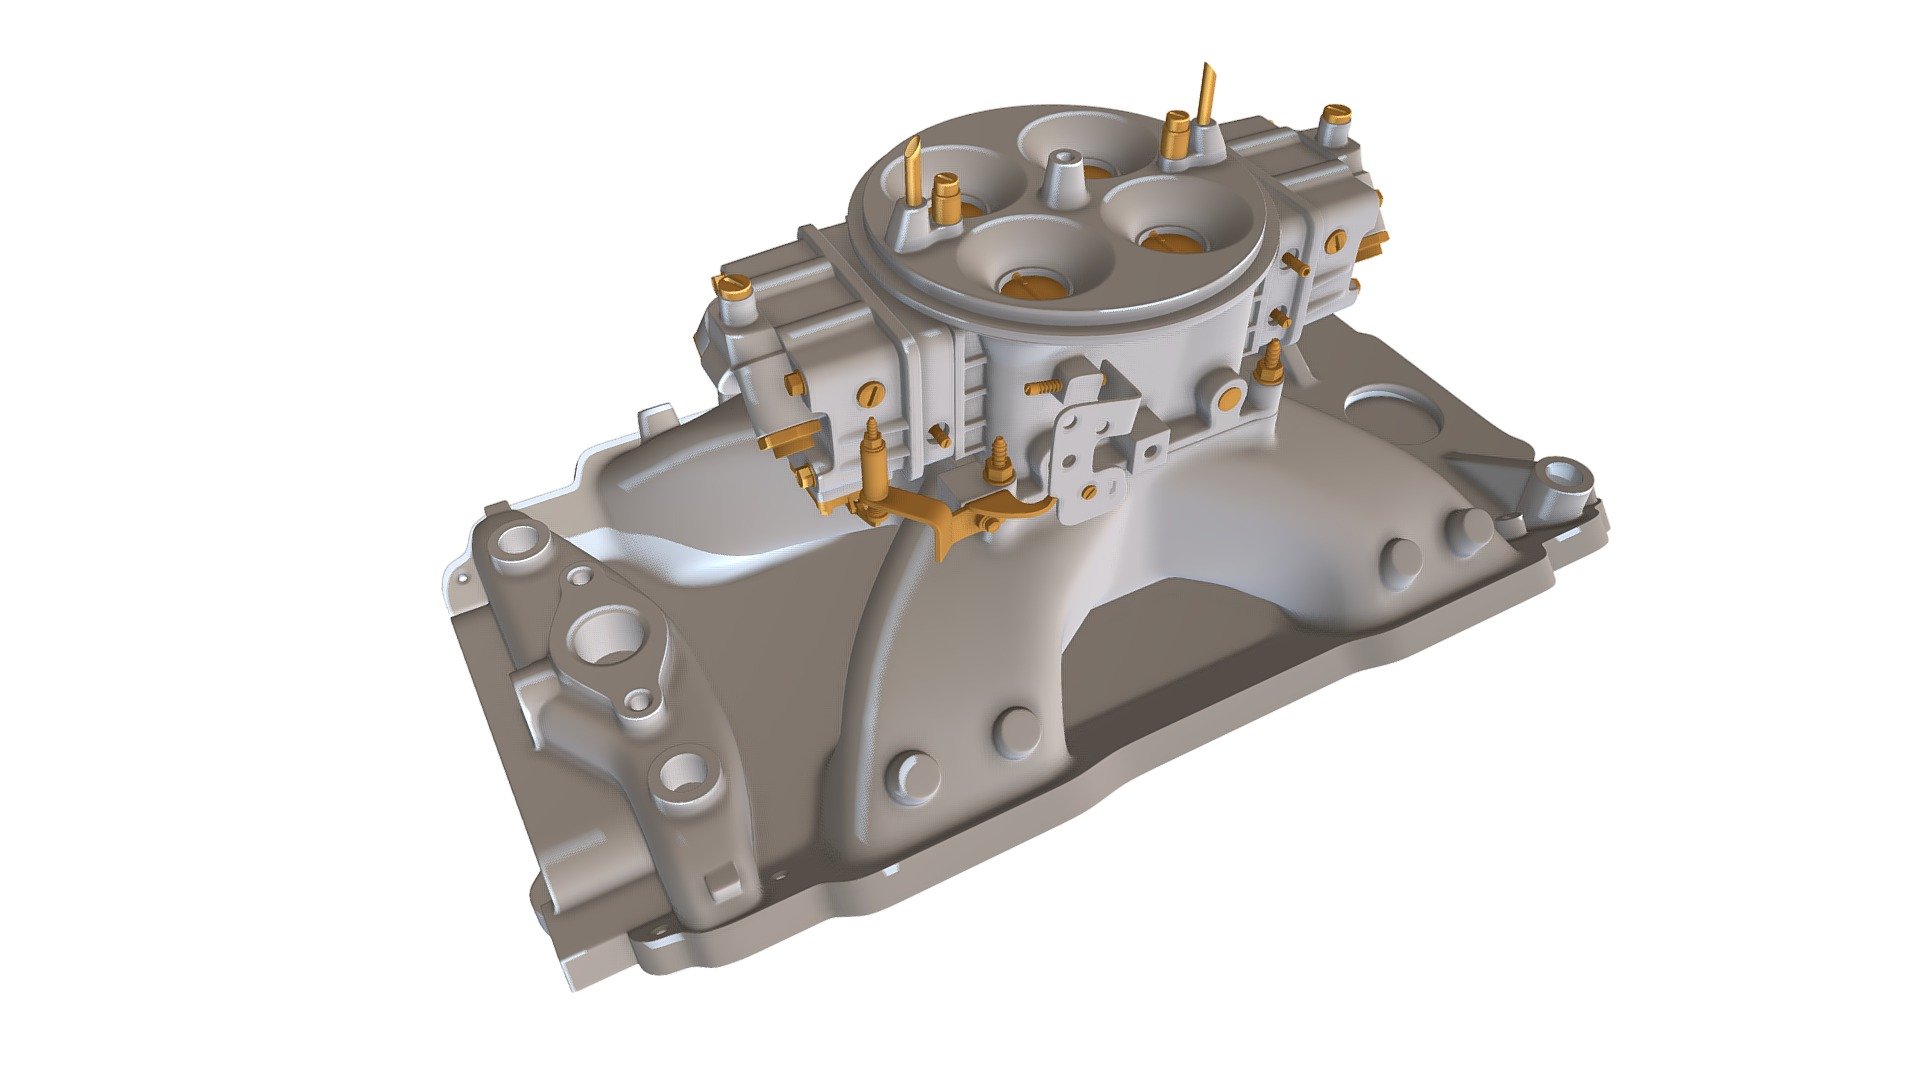 Quality 3d model of holley carburetor and intake manifold 3d model